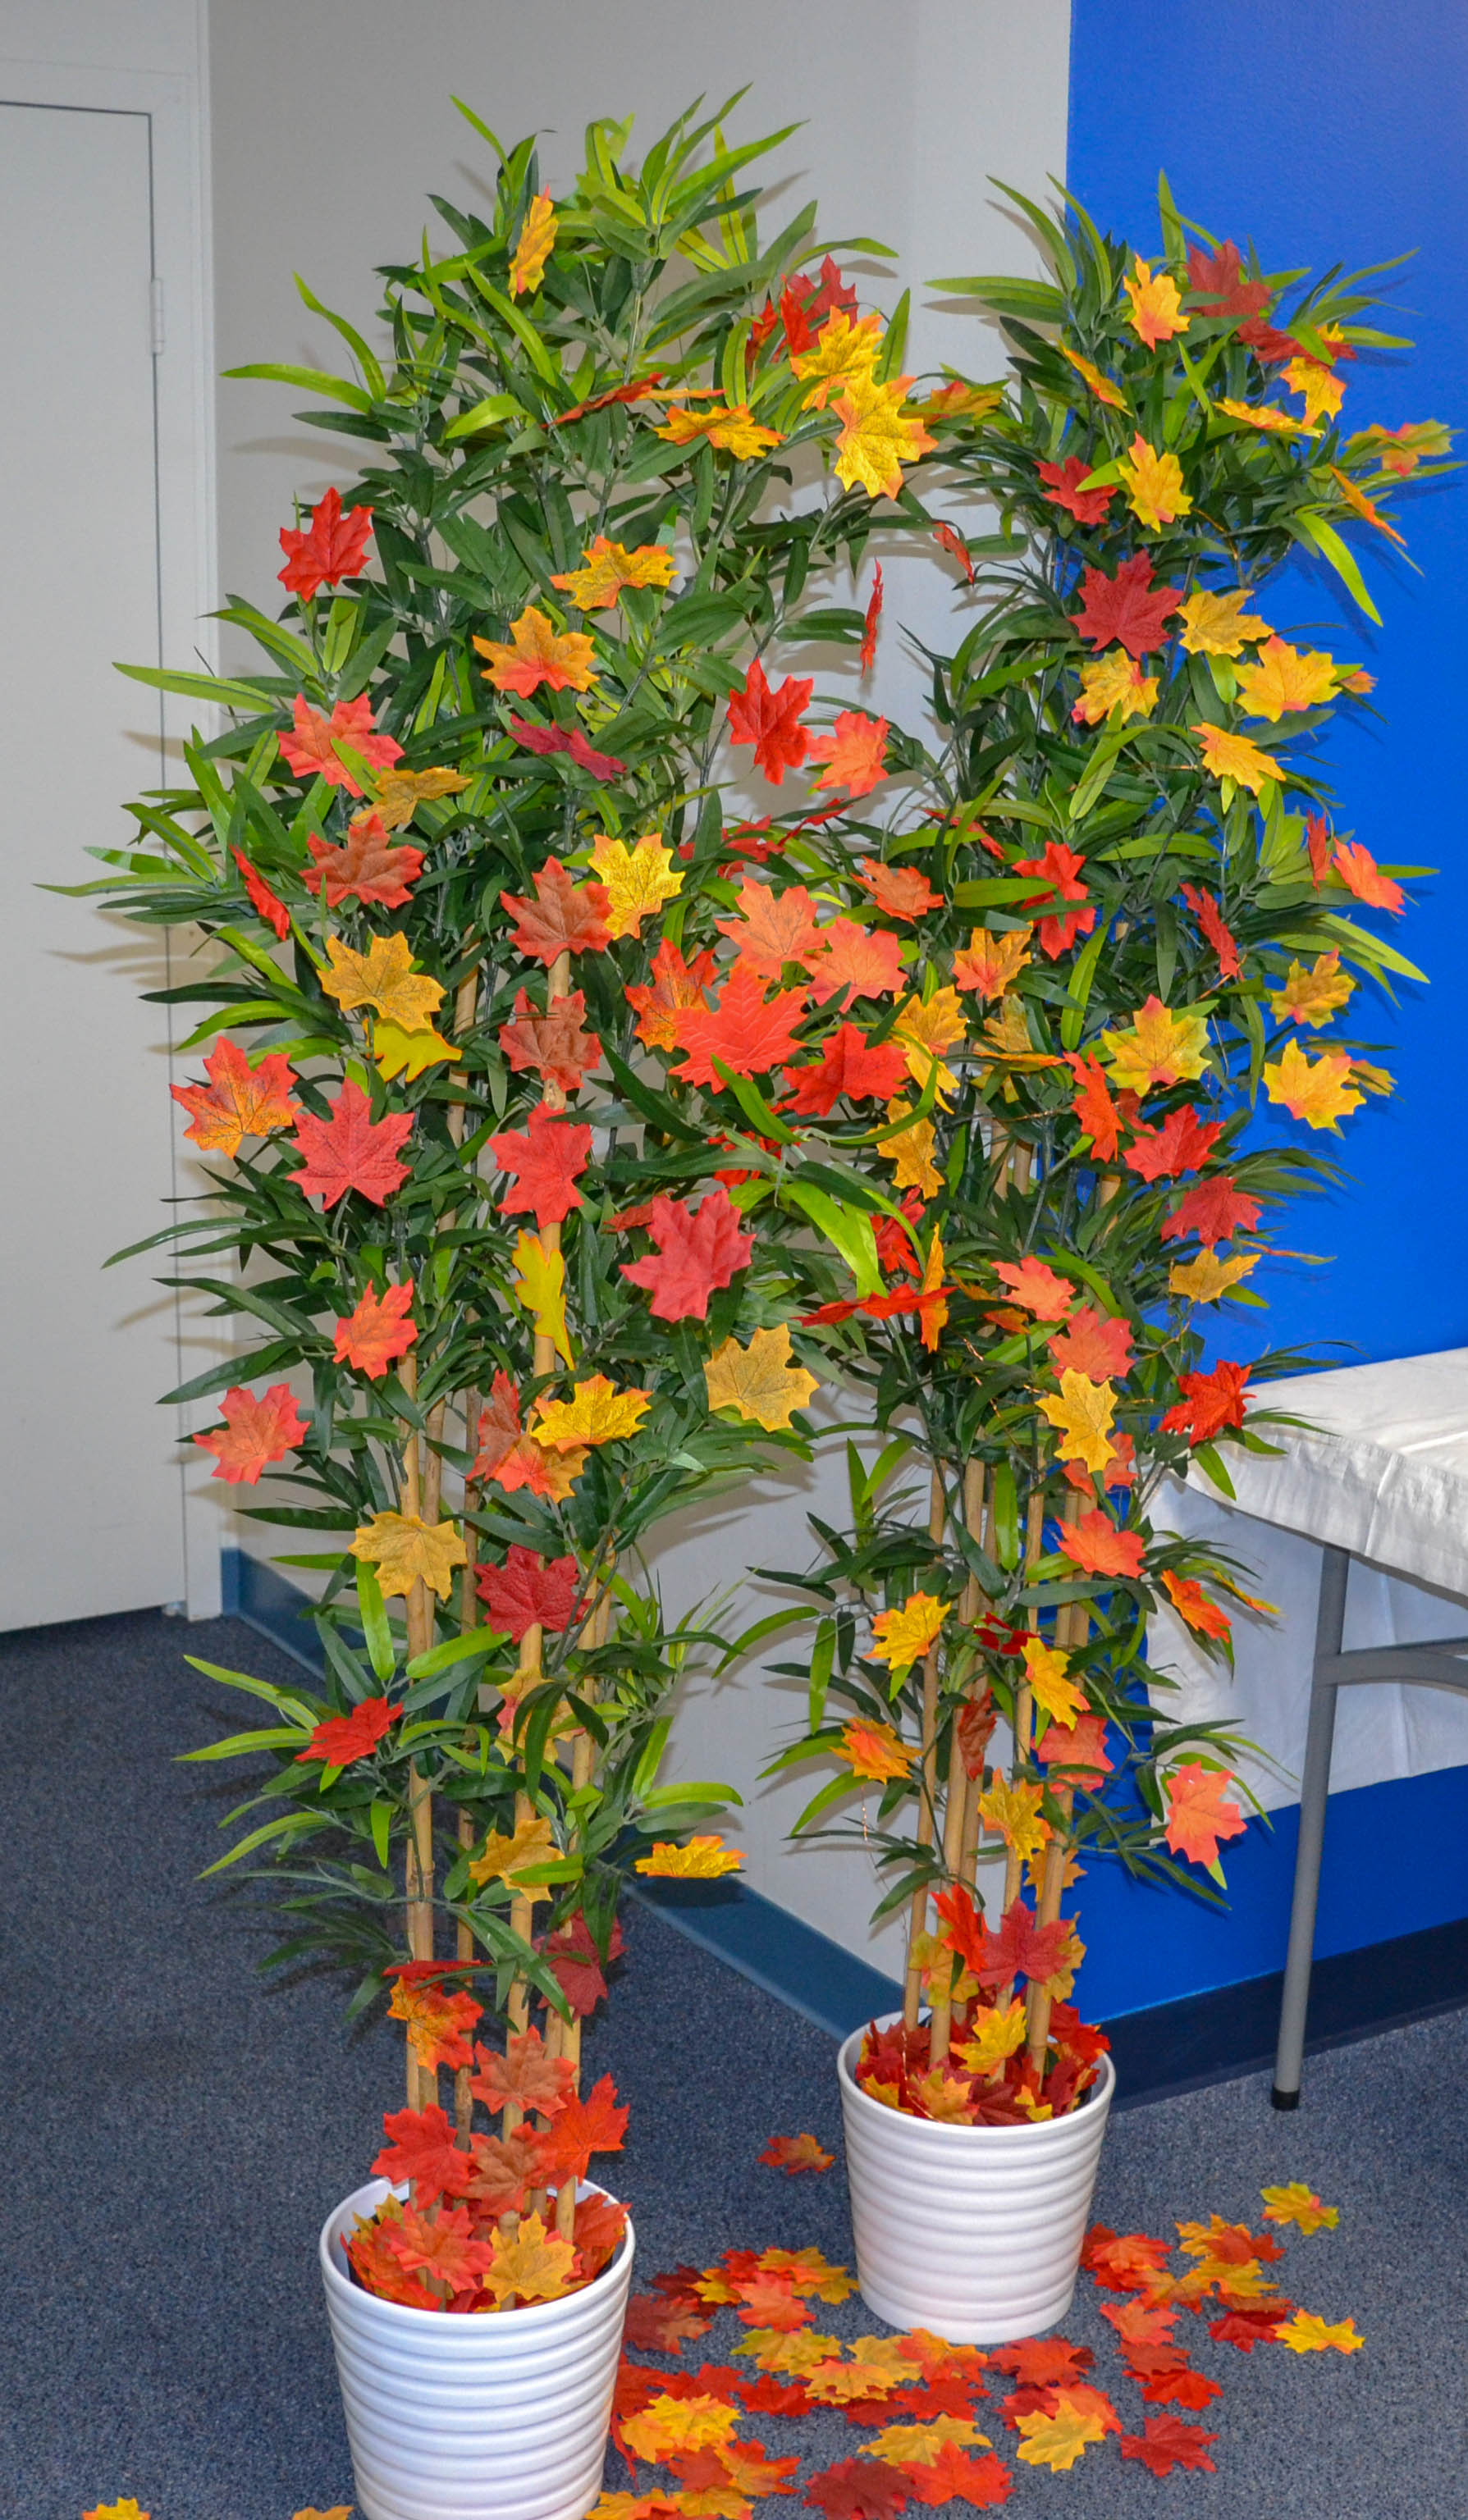 Autumn decorations featured at Diplomatic Language Services